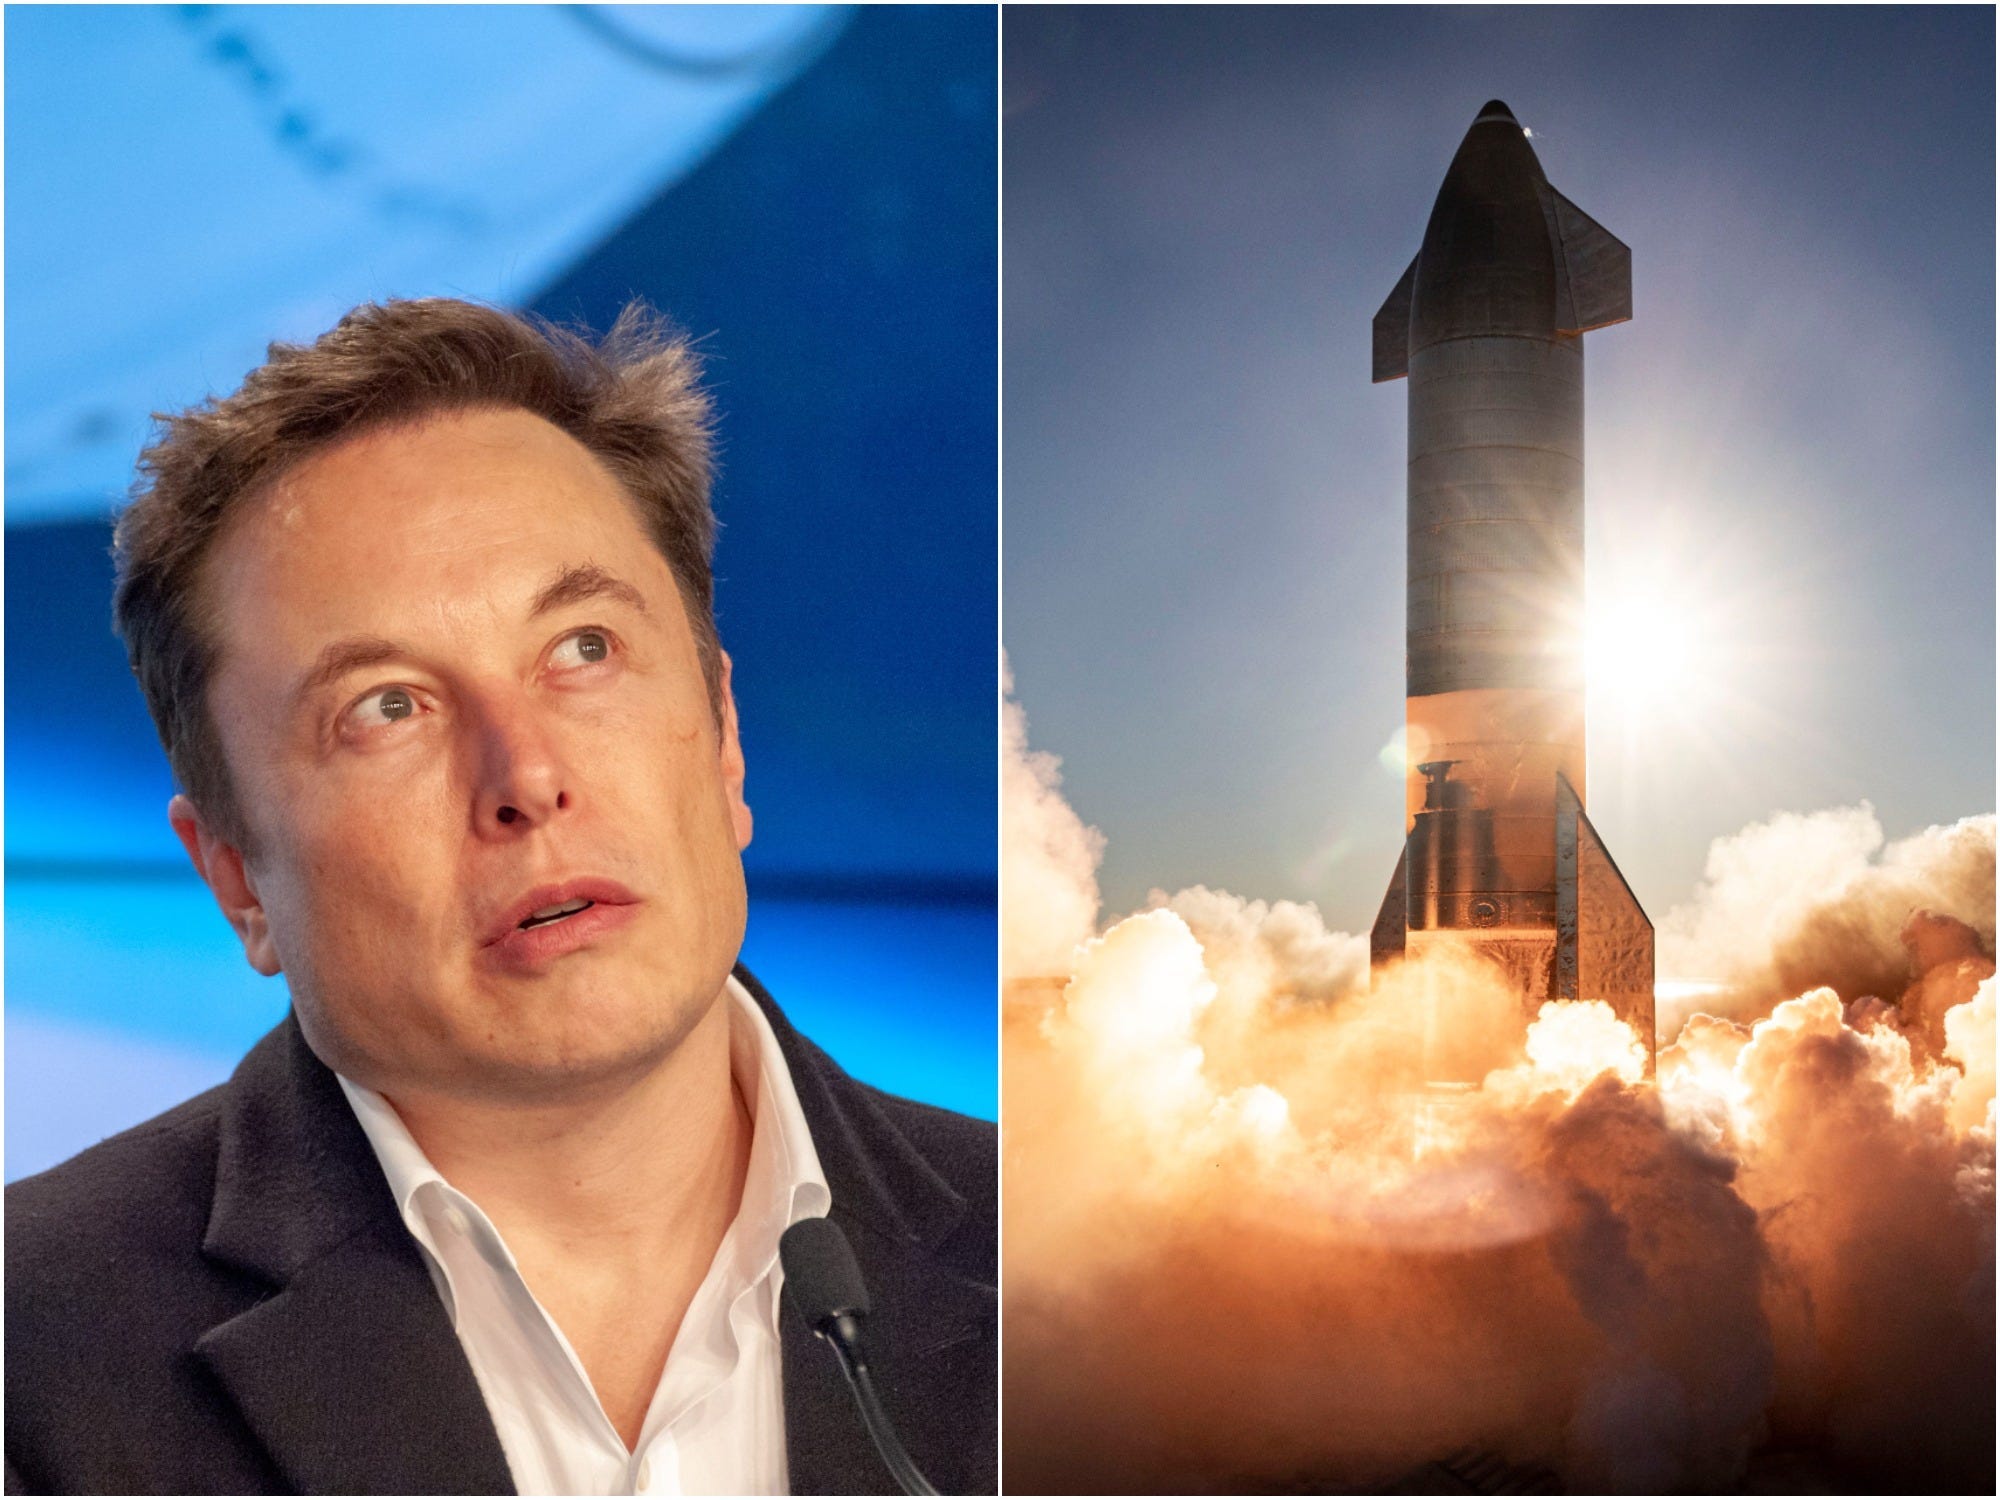 Left: SpaceX founder Elon Musk at a press briefing on March 2, 2019. Right: SpaceX's Starship serial No. 8 rocket prototype launches from a pad in Boca Chica, Texas, on December 9, 2020.